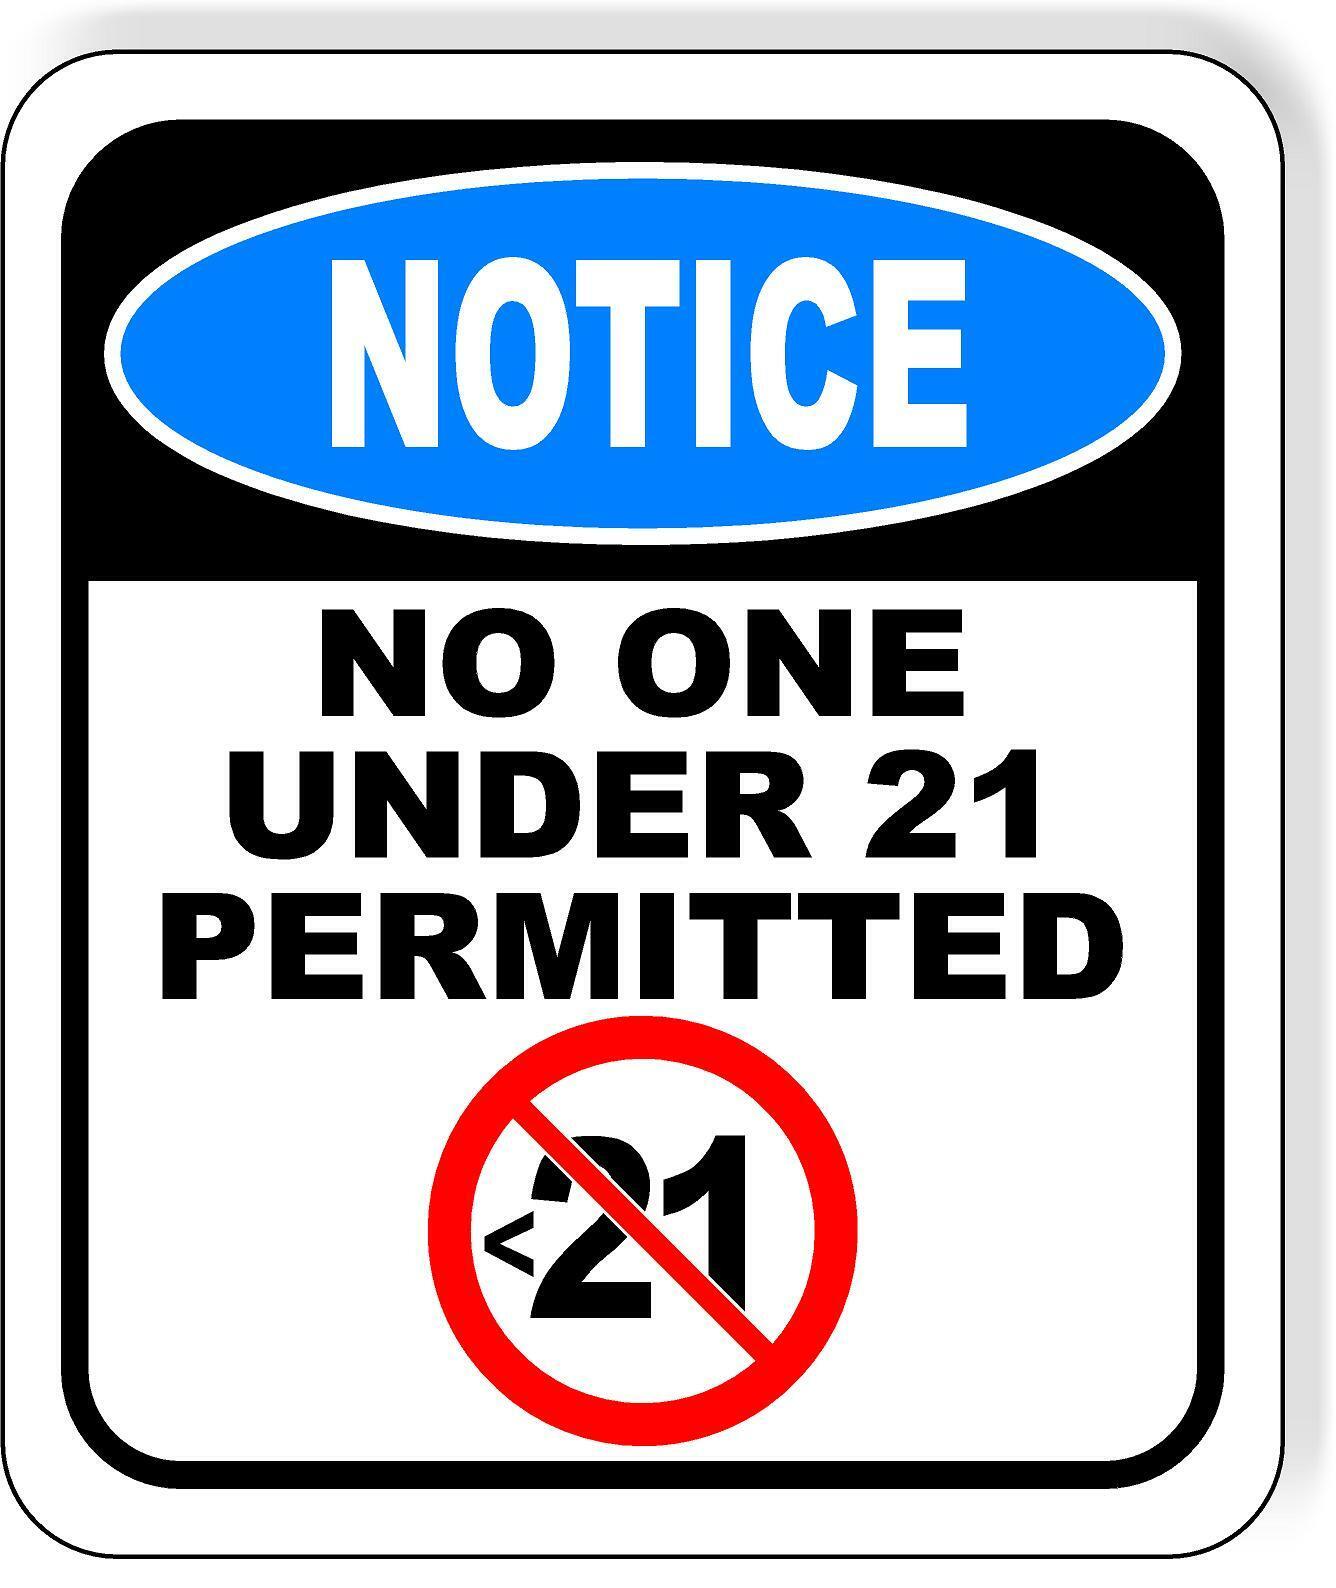 NOTICE NO ONE UNDER 21 Metal Surprise price PERMITTED Aluminum composite Nippon regular agency sign